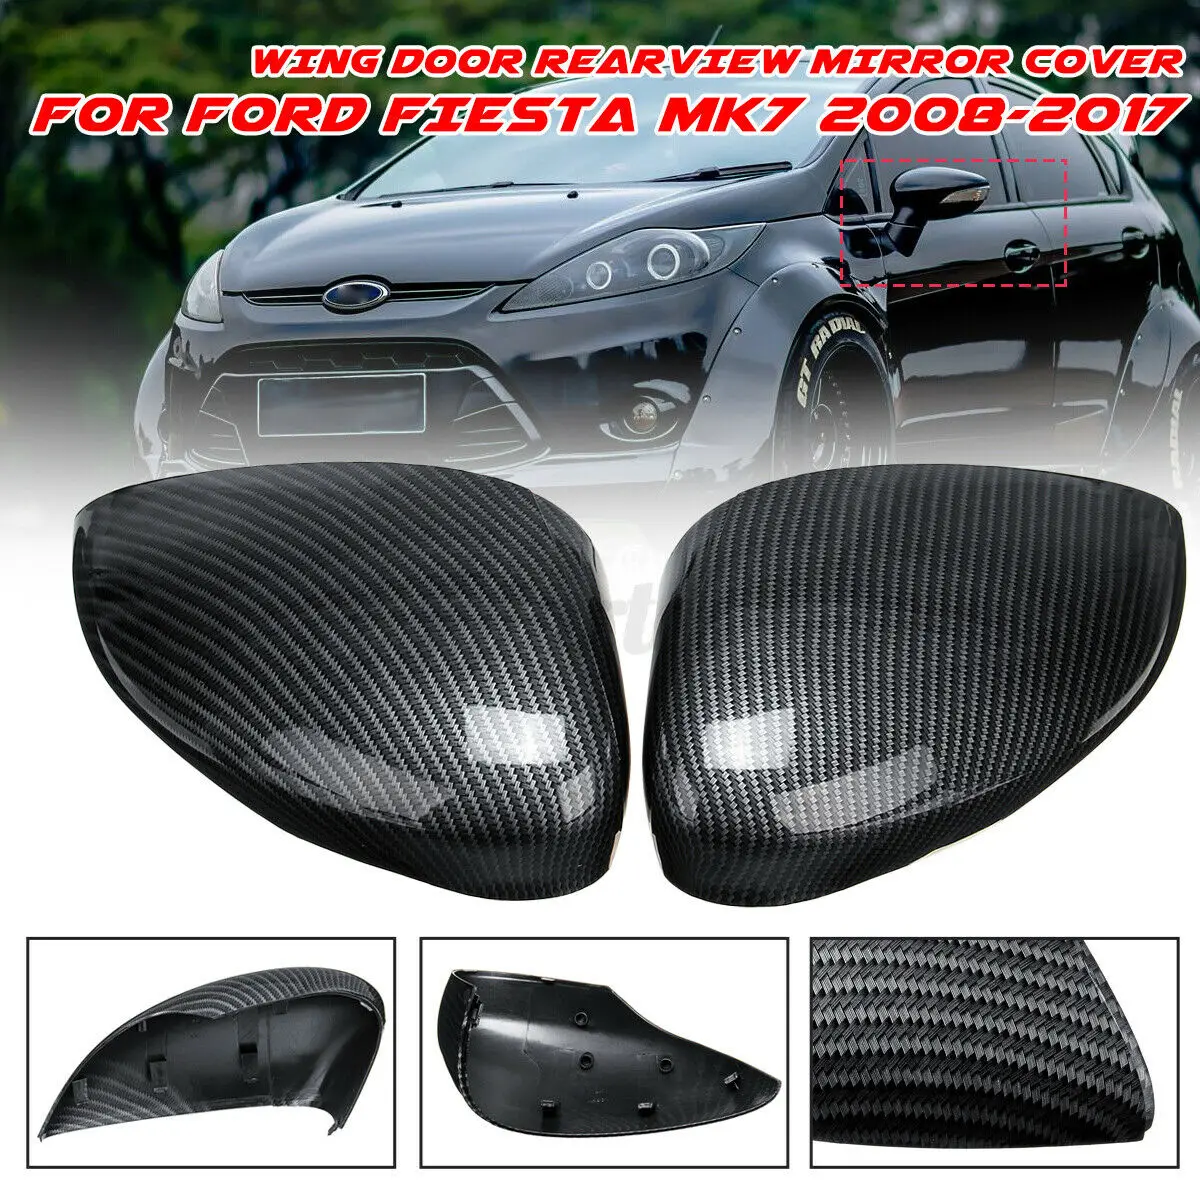 

For Ford Fiesta MK7 2008-2019 Replacement Car Rearview Side Mirror Cover Wing Cap Carbon Fiber Exterior Door Rear View Case Trim